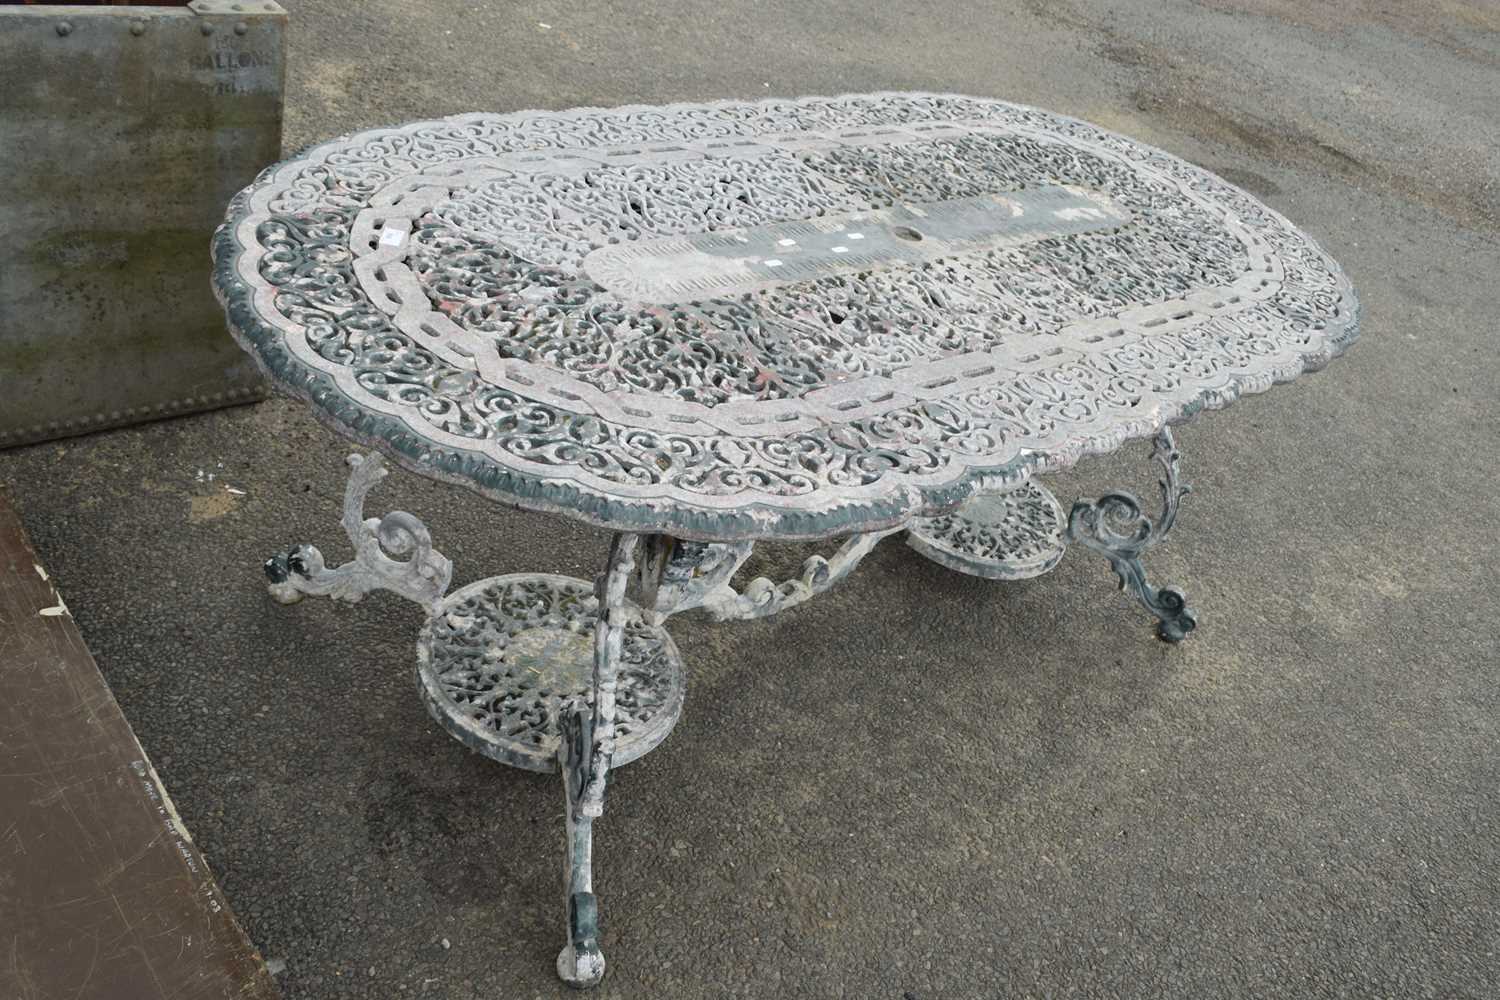 Cast aluminium oval topped garden table with pierced decoration